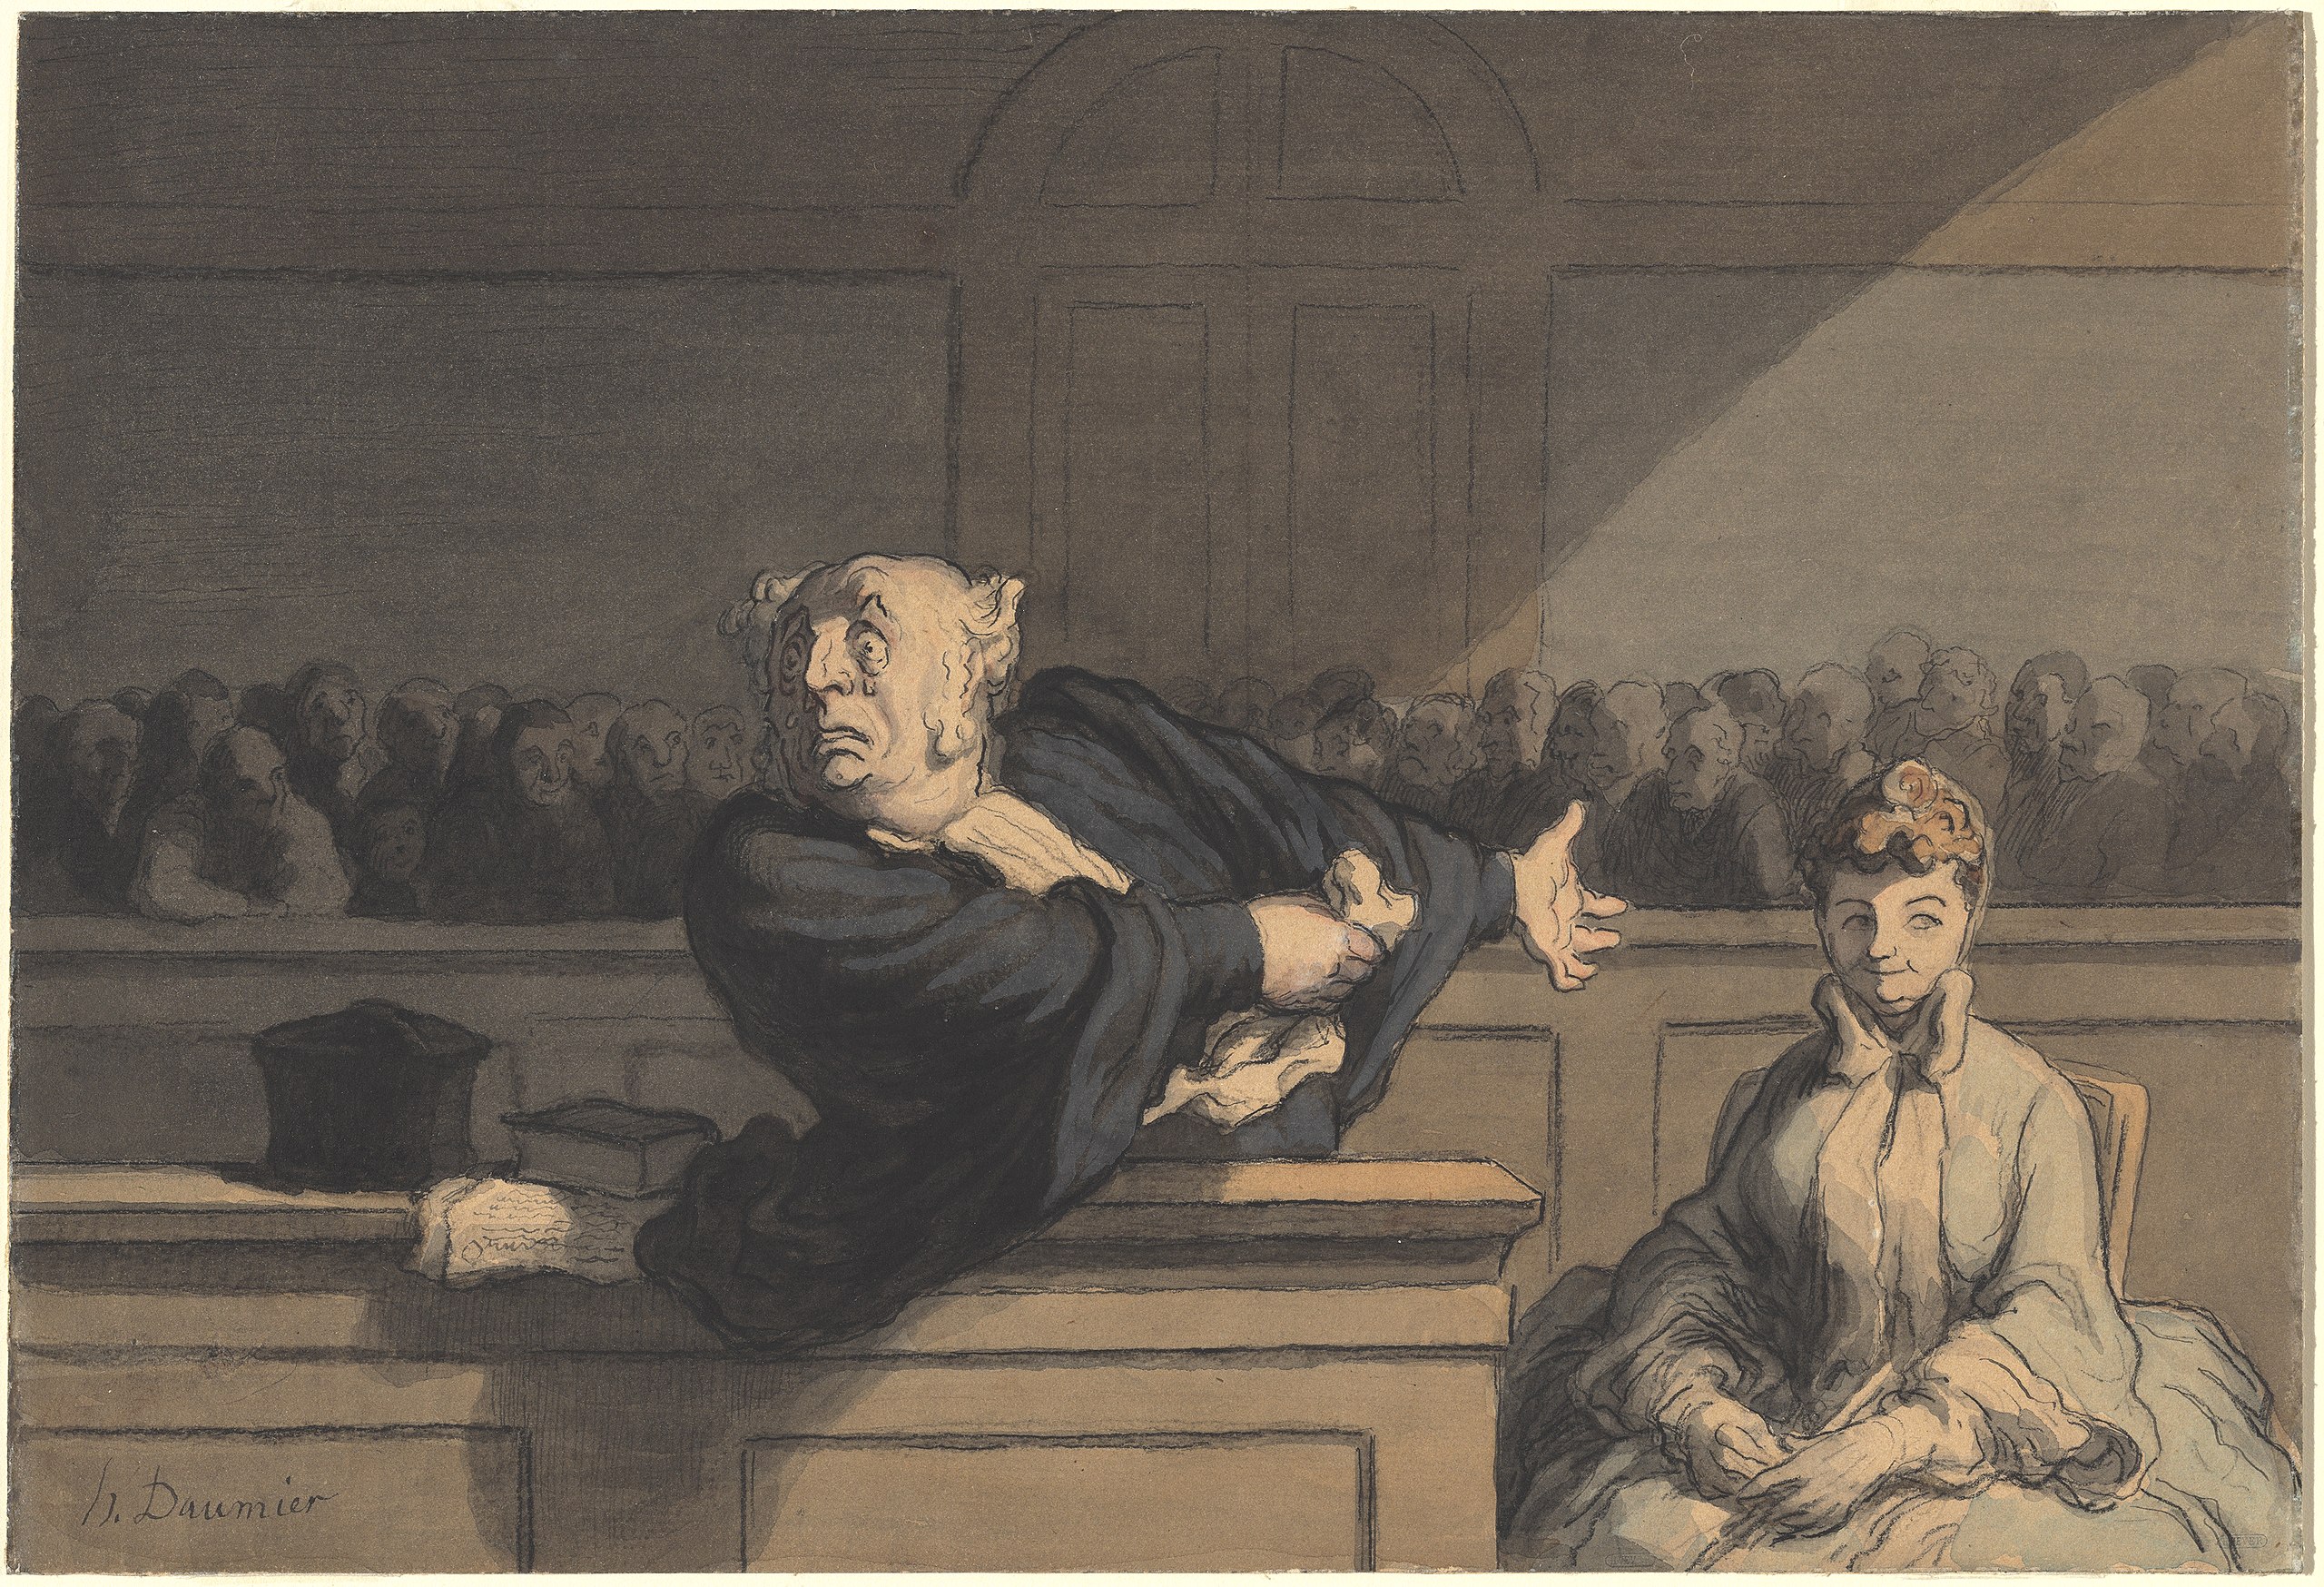 Honore_Daumier_Le_Defenseur_Counsel_for_the_Defense_c._1862-1865_NGA_168817